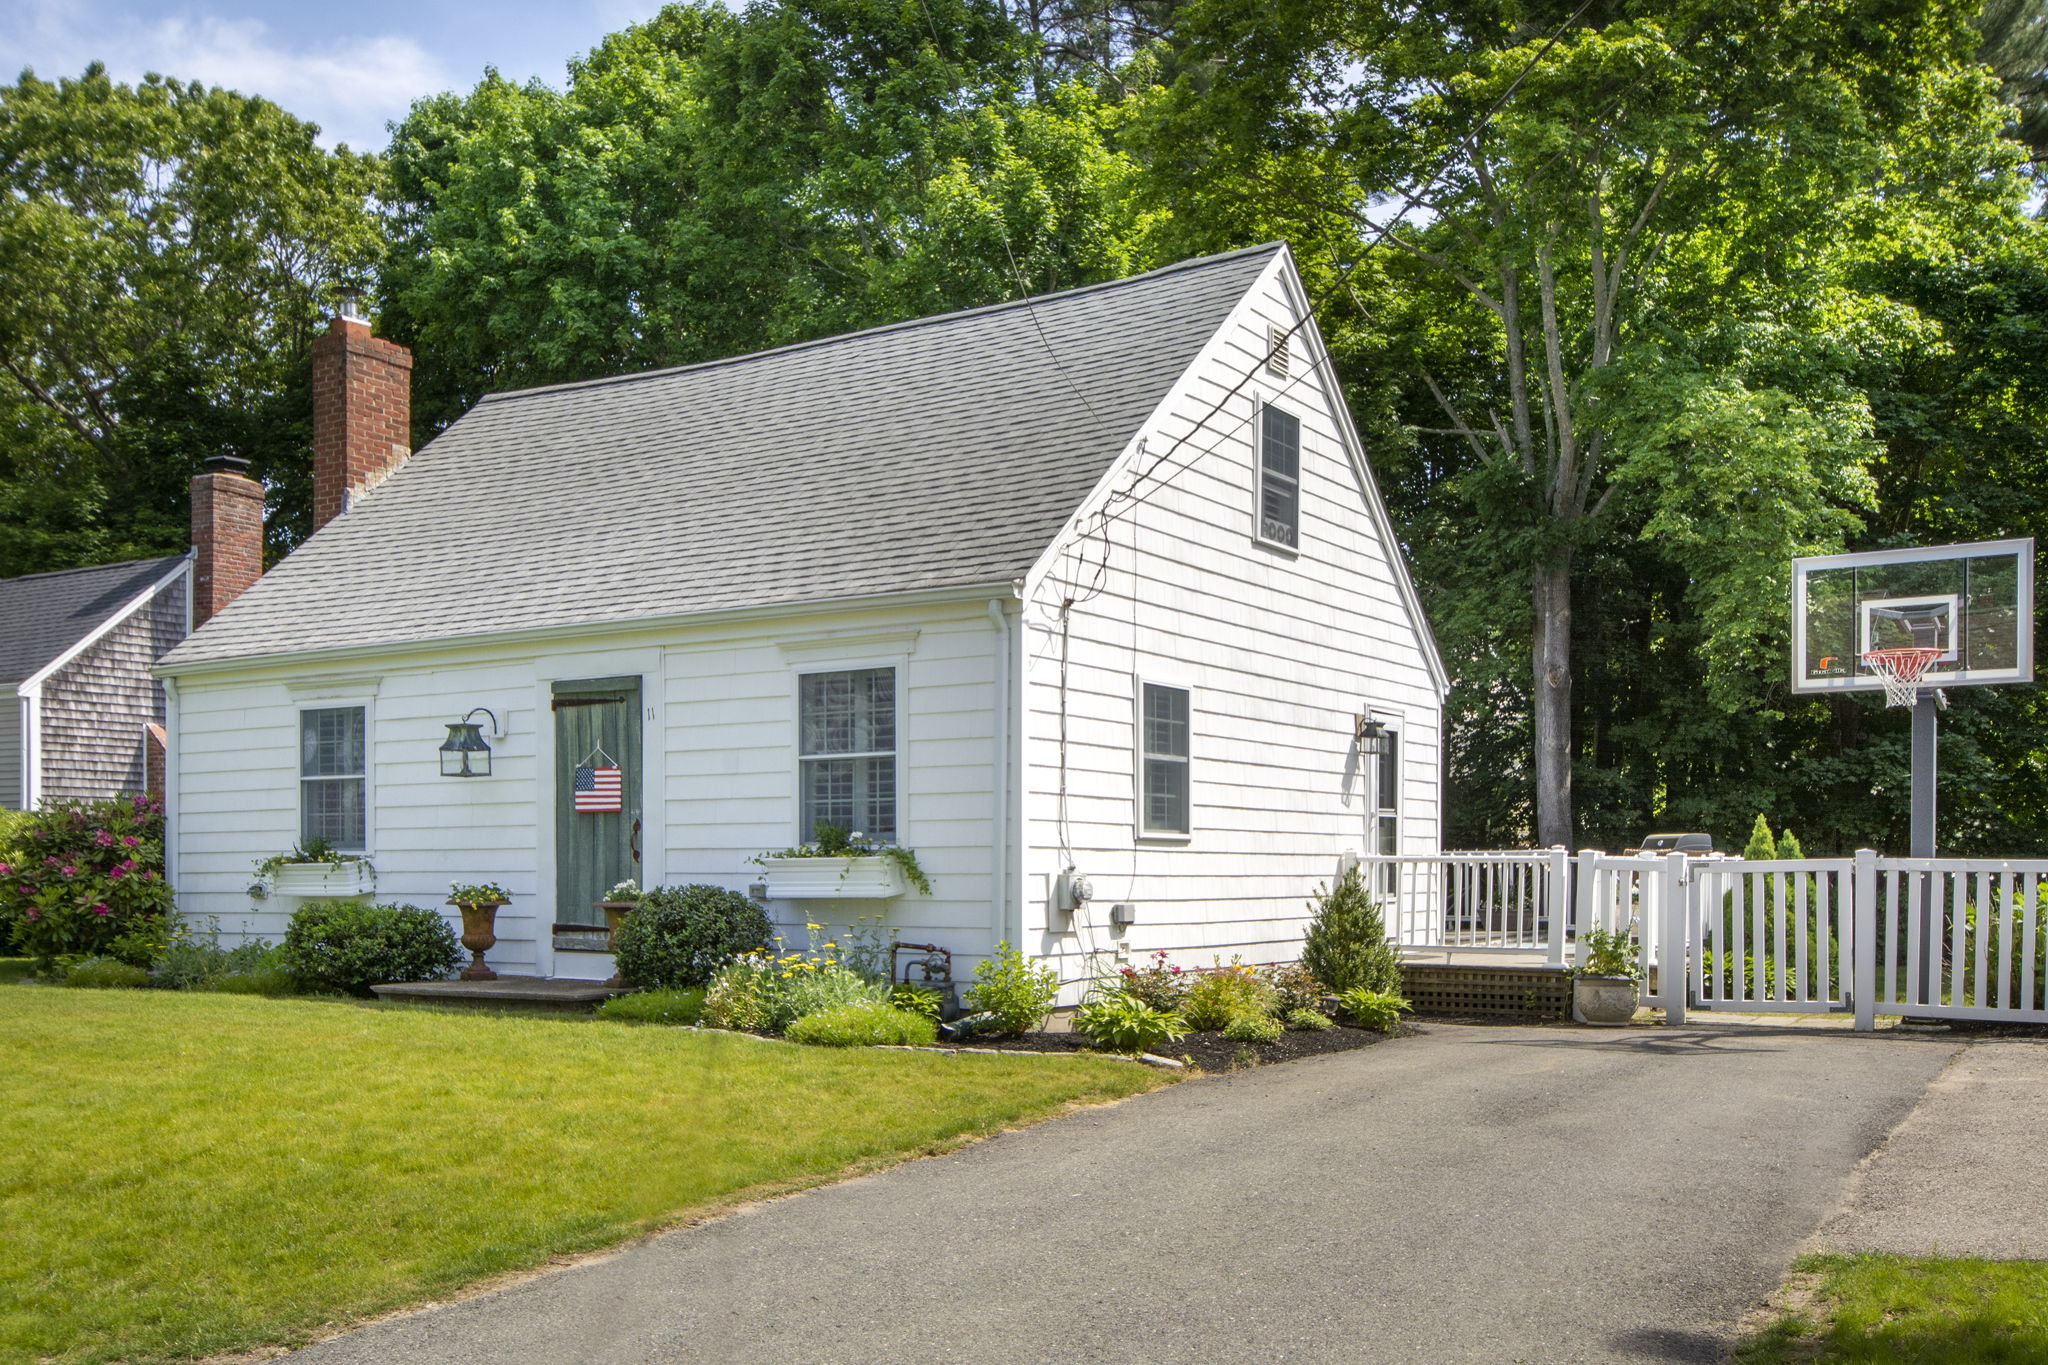  11 Wilder Rd, Norwell, MA 02061, US